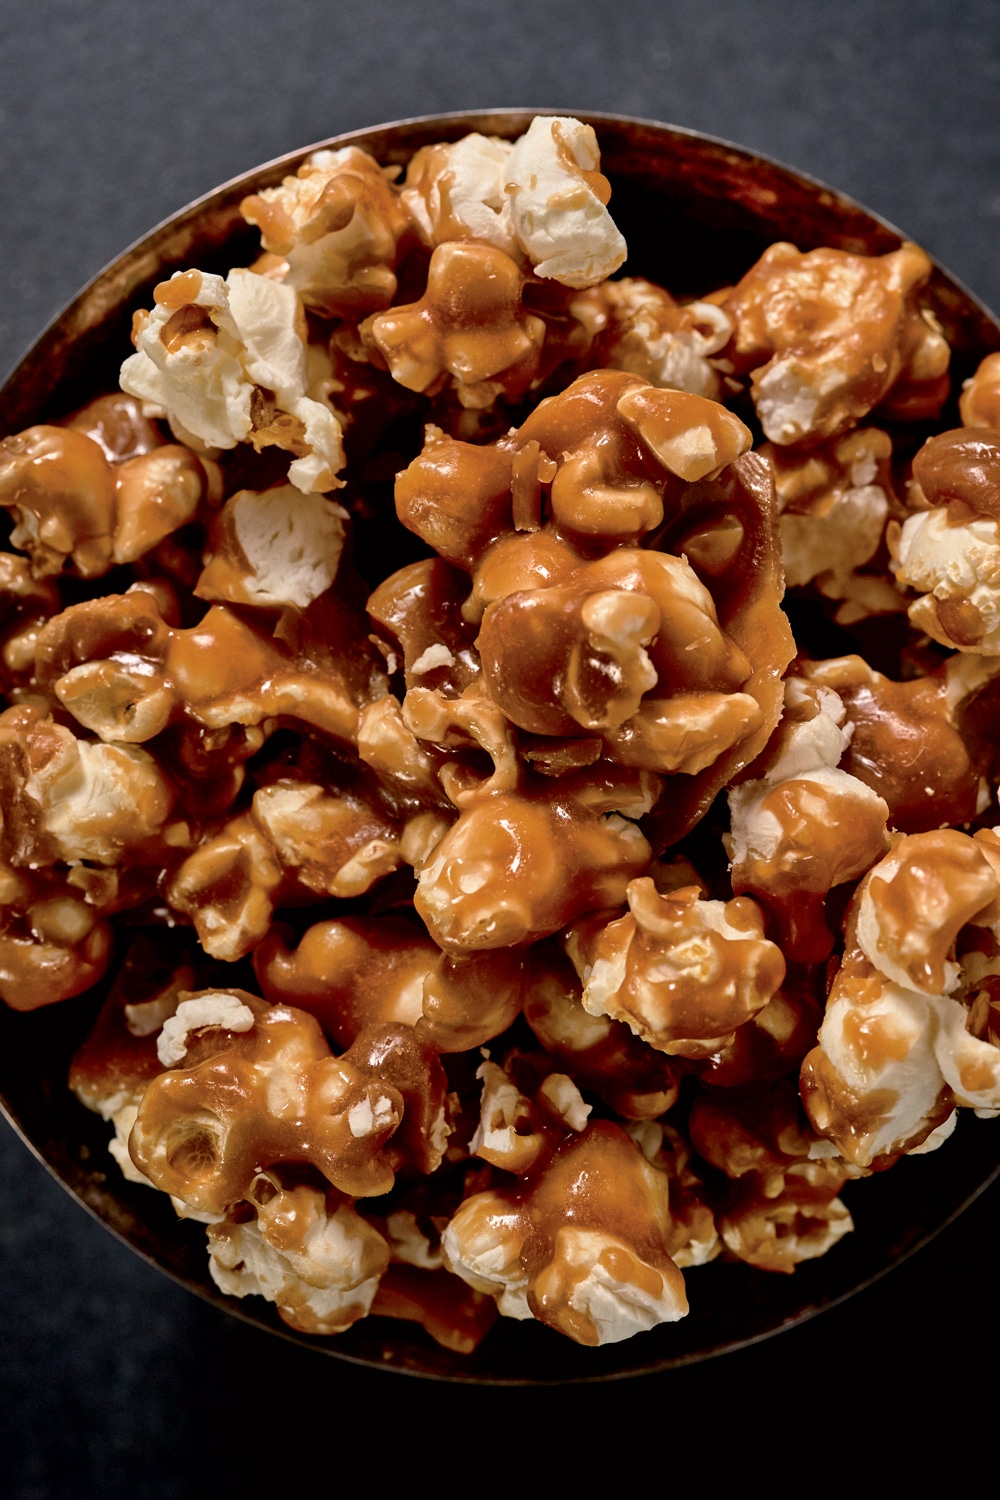 Maple Toffee Popcorn with Salted Peanuts